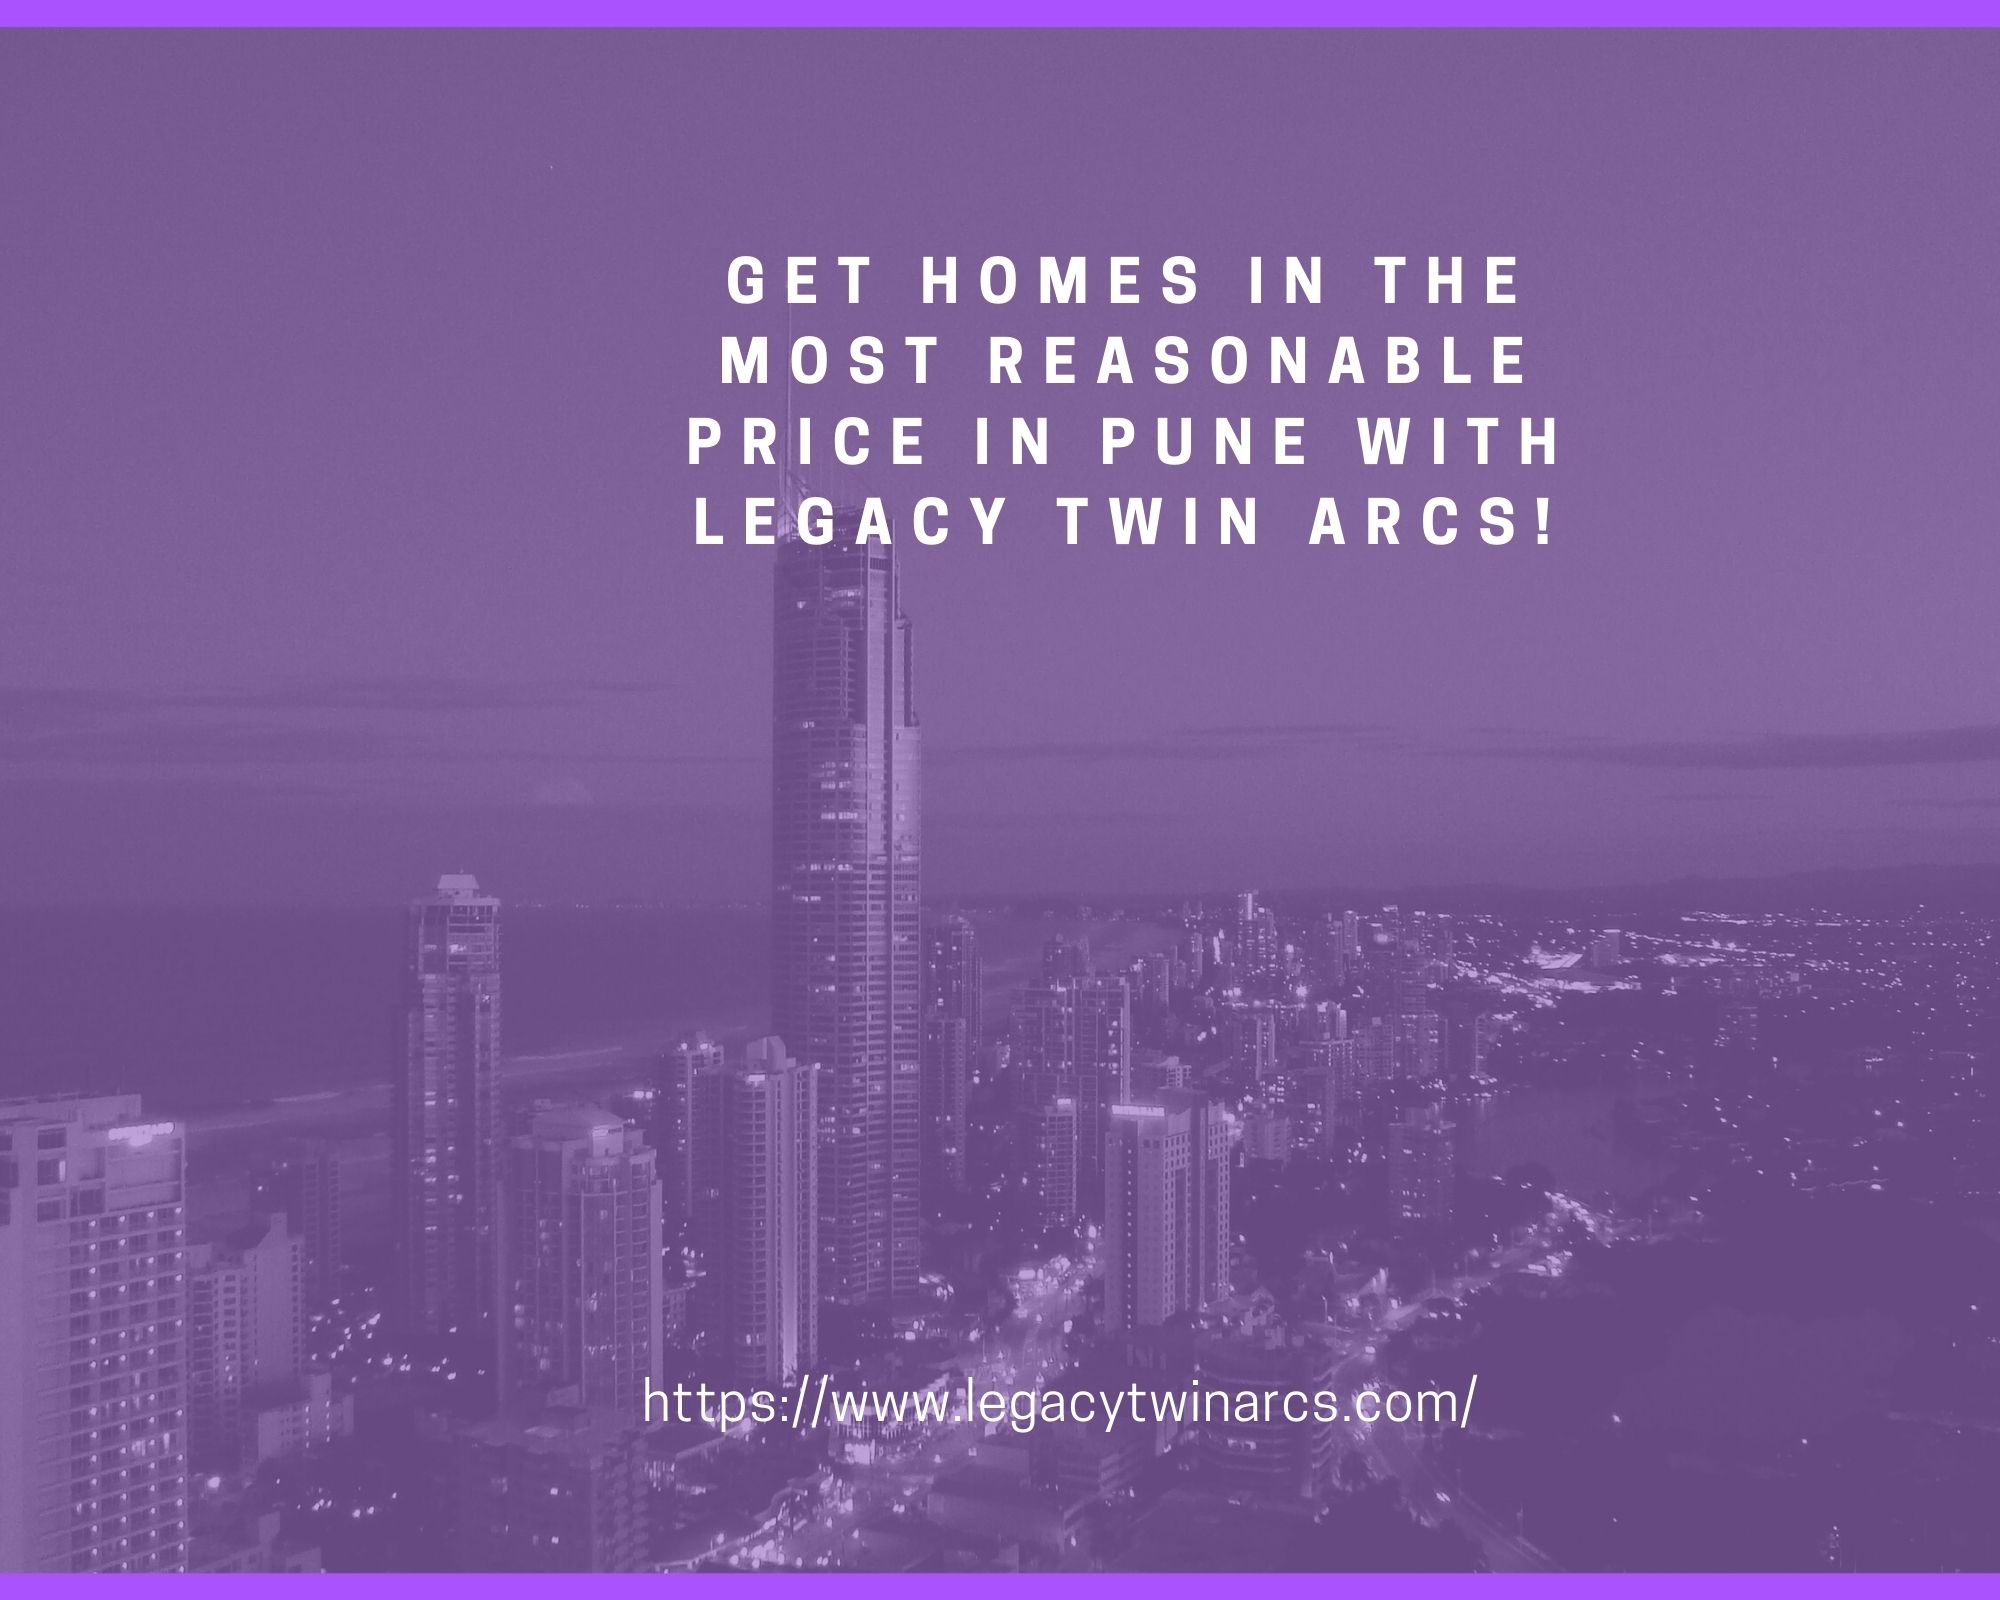 Get homes in the most reasonable price in Pune with Legacy Twin Arcs!